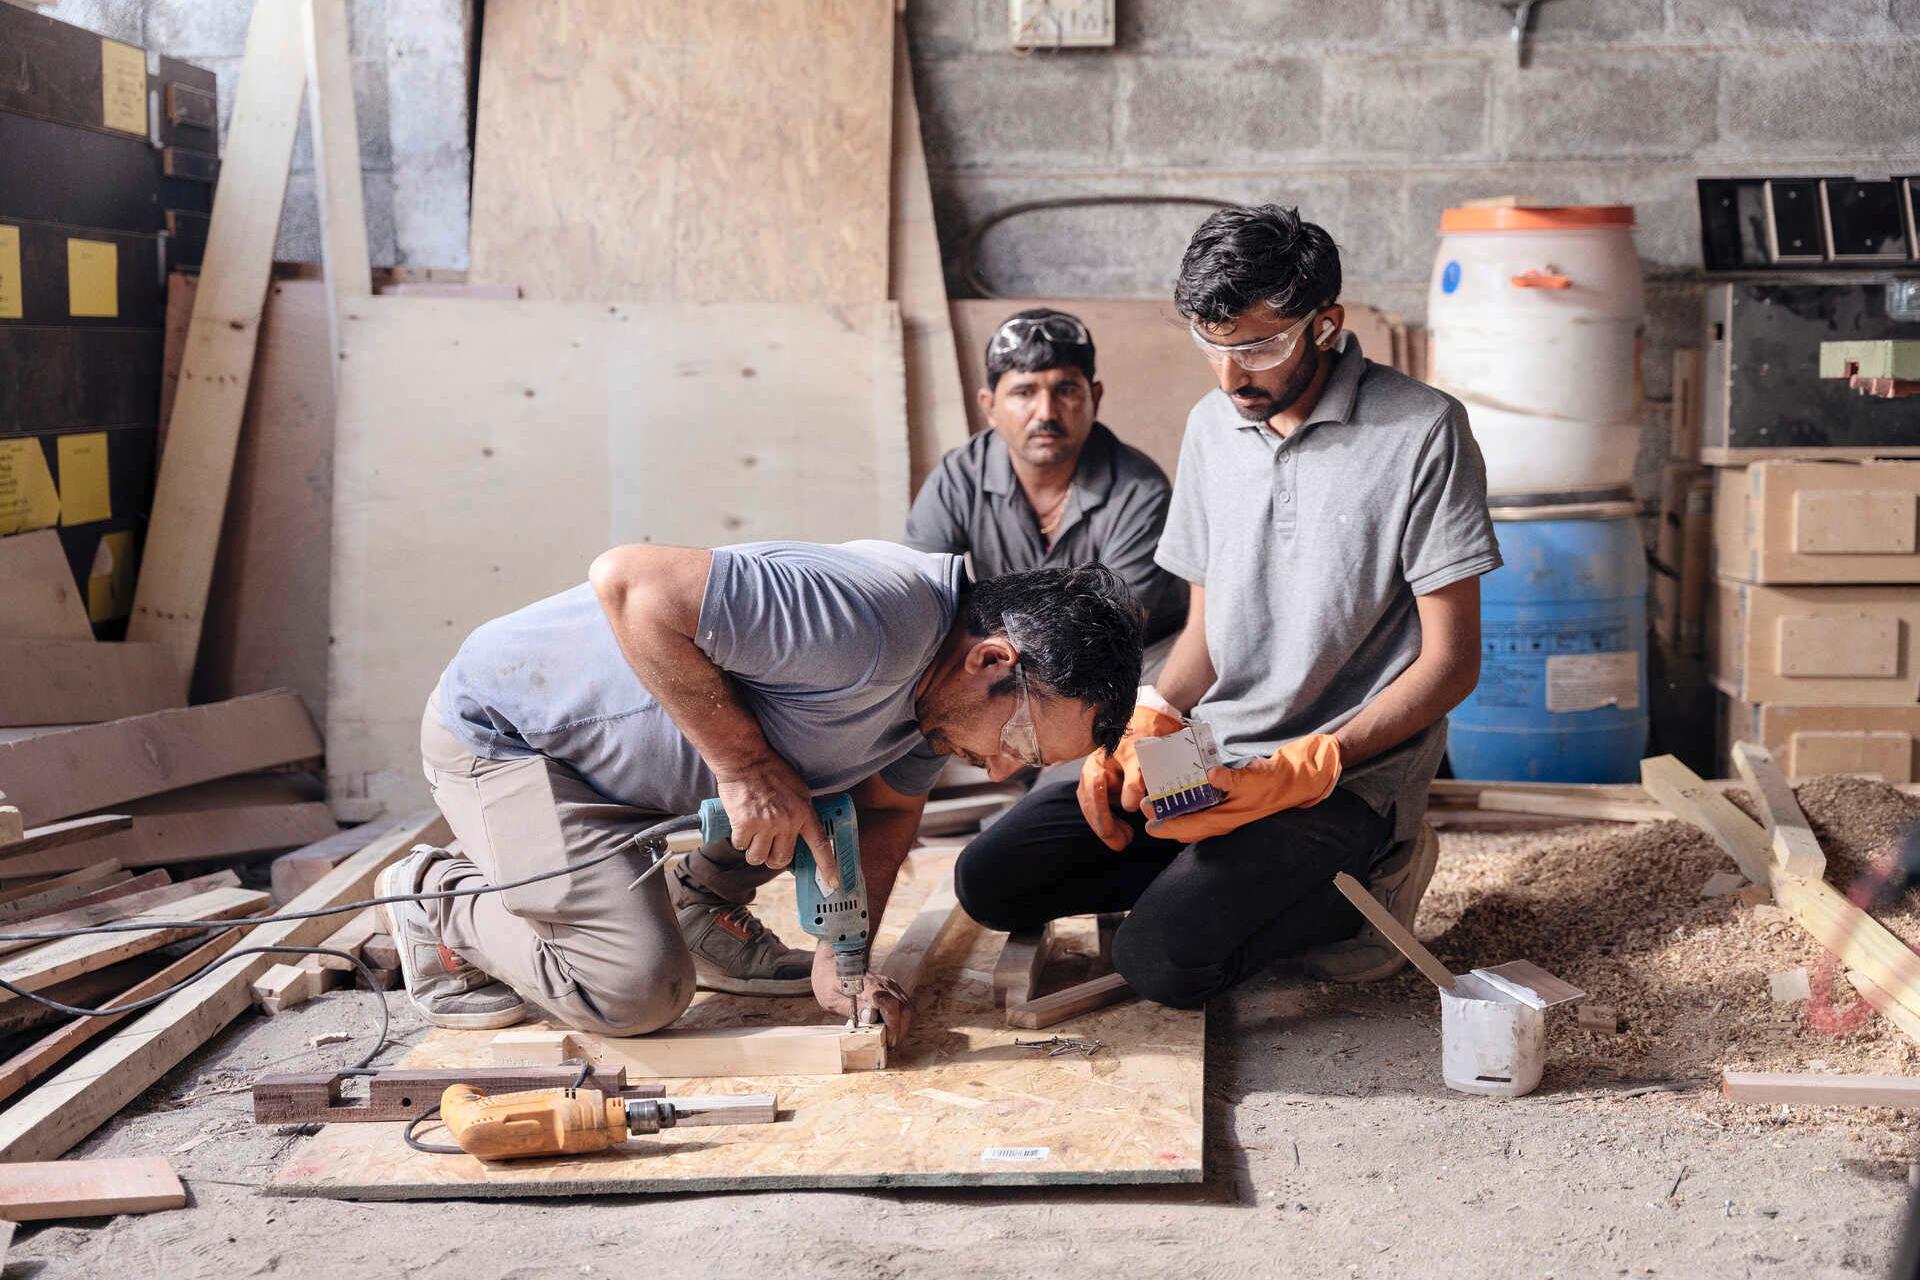 Sharma, Radia and a colleague are building new benches from discarded wooden crates